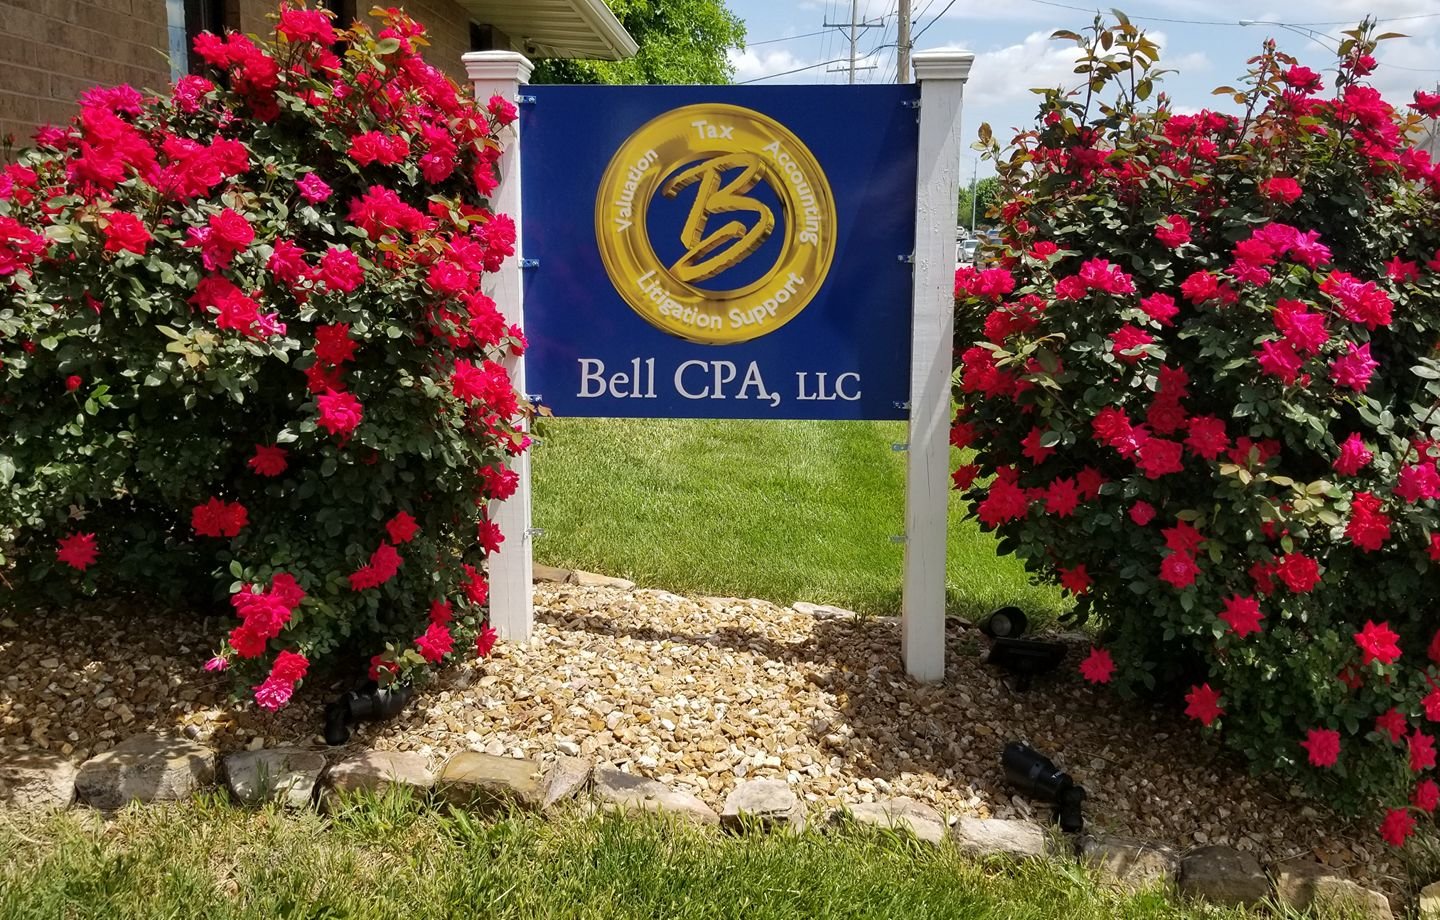 Bell CPA began transitioning Bohl, House & Samek's local clients last month.